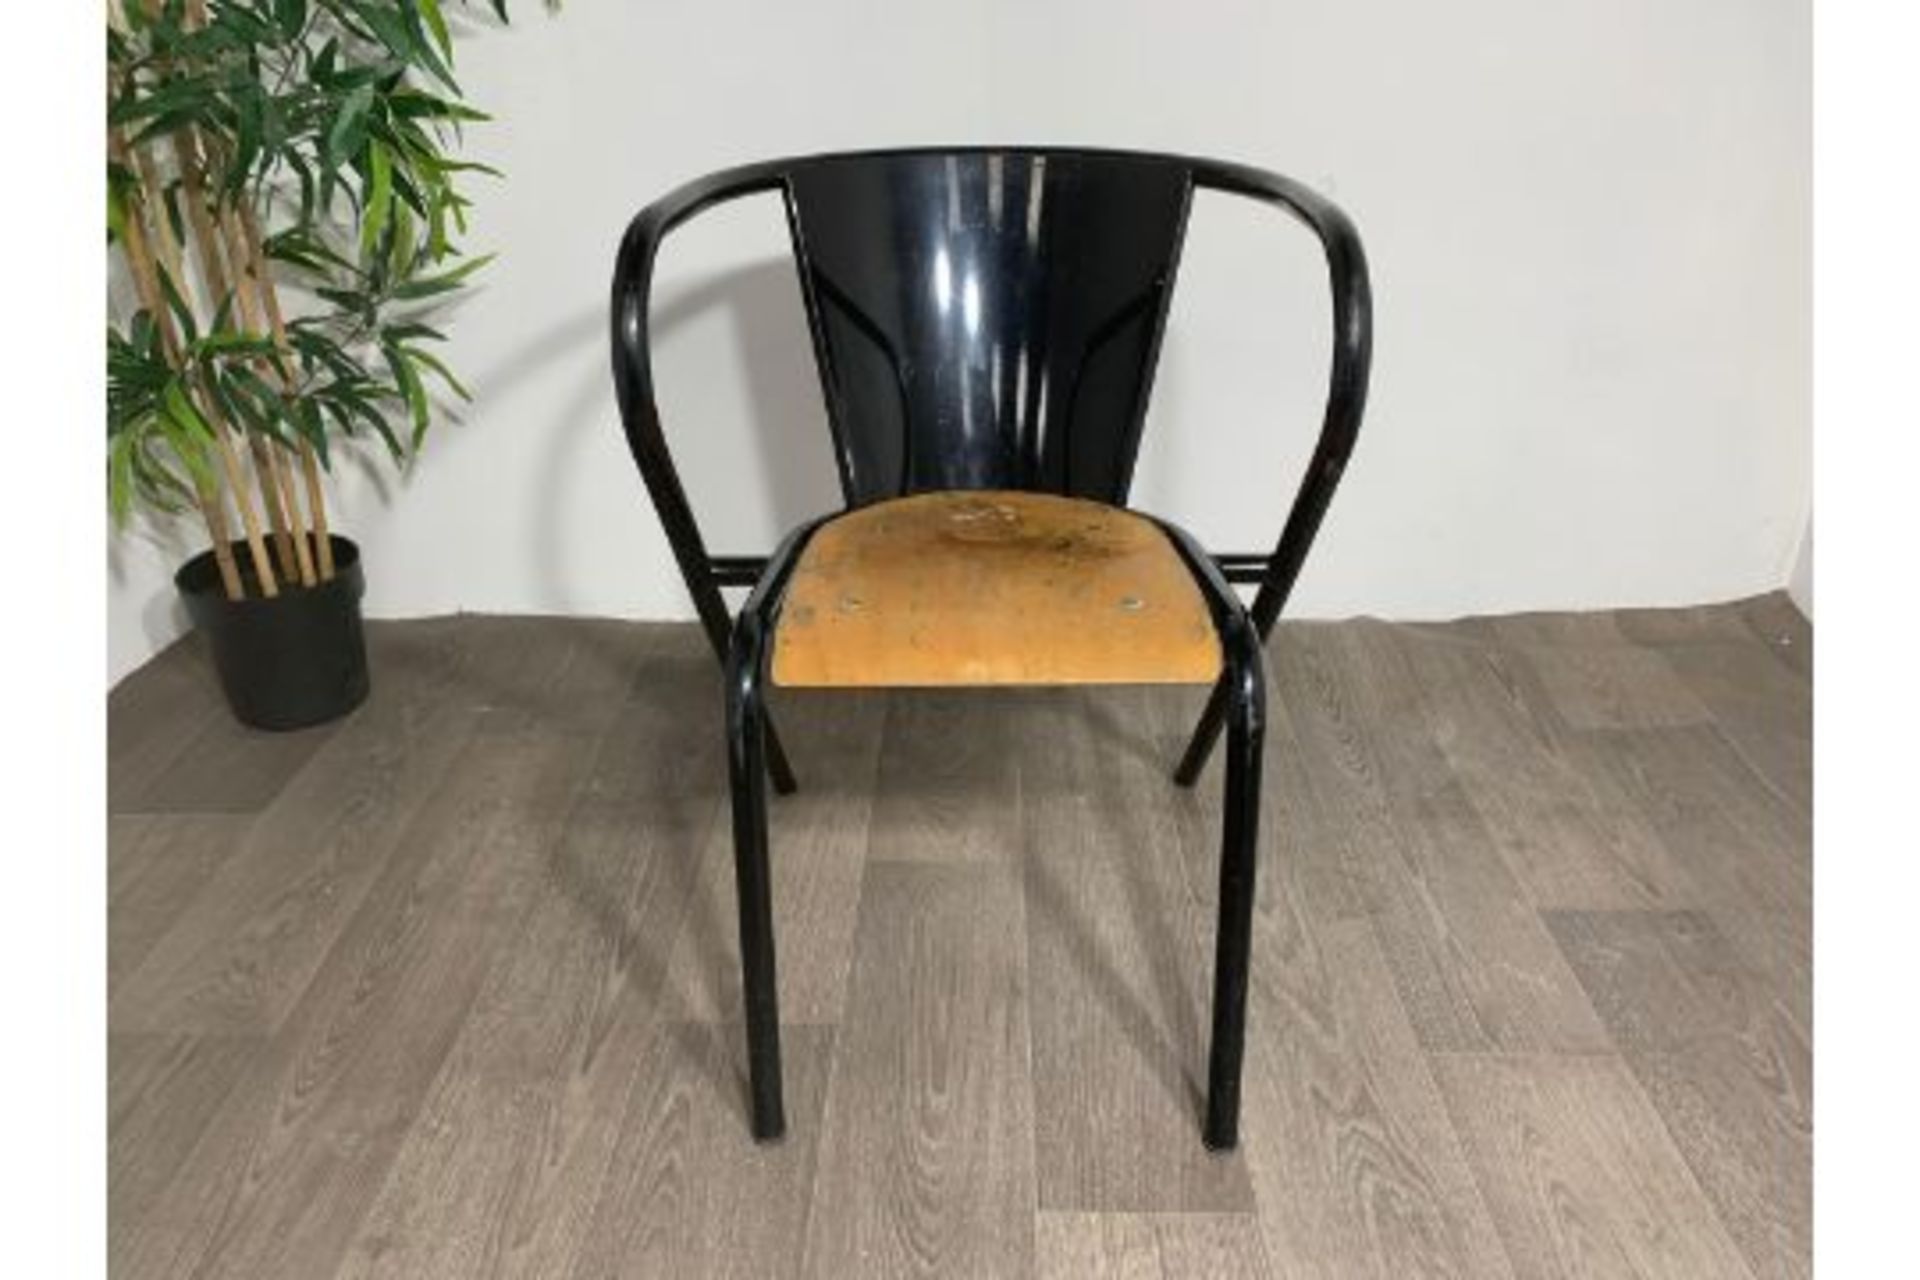 Adico 5008 Black Chair With Wooden Seat x2